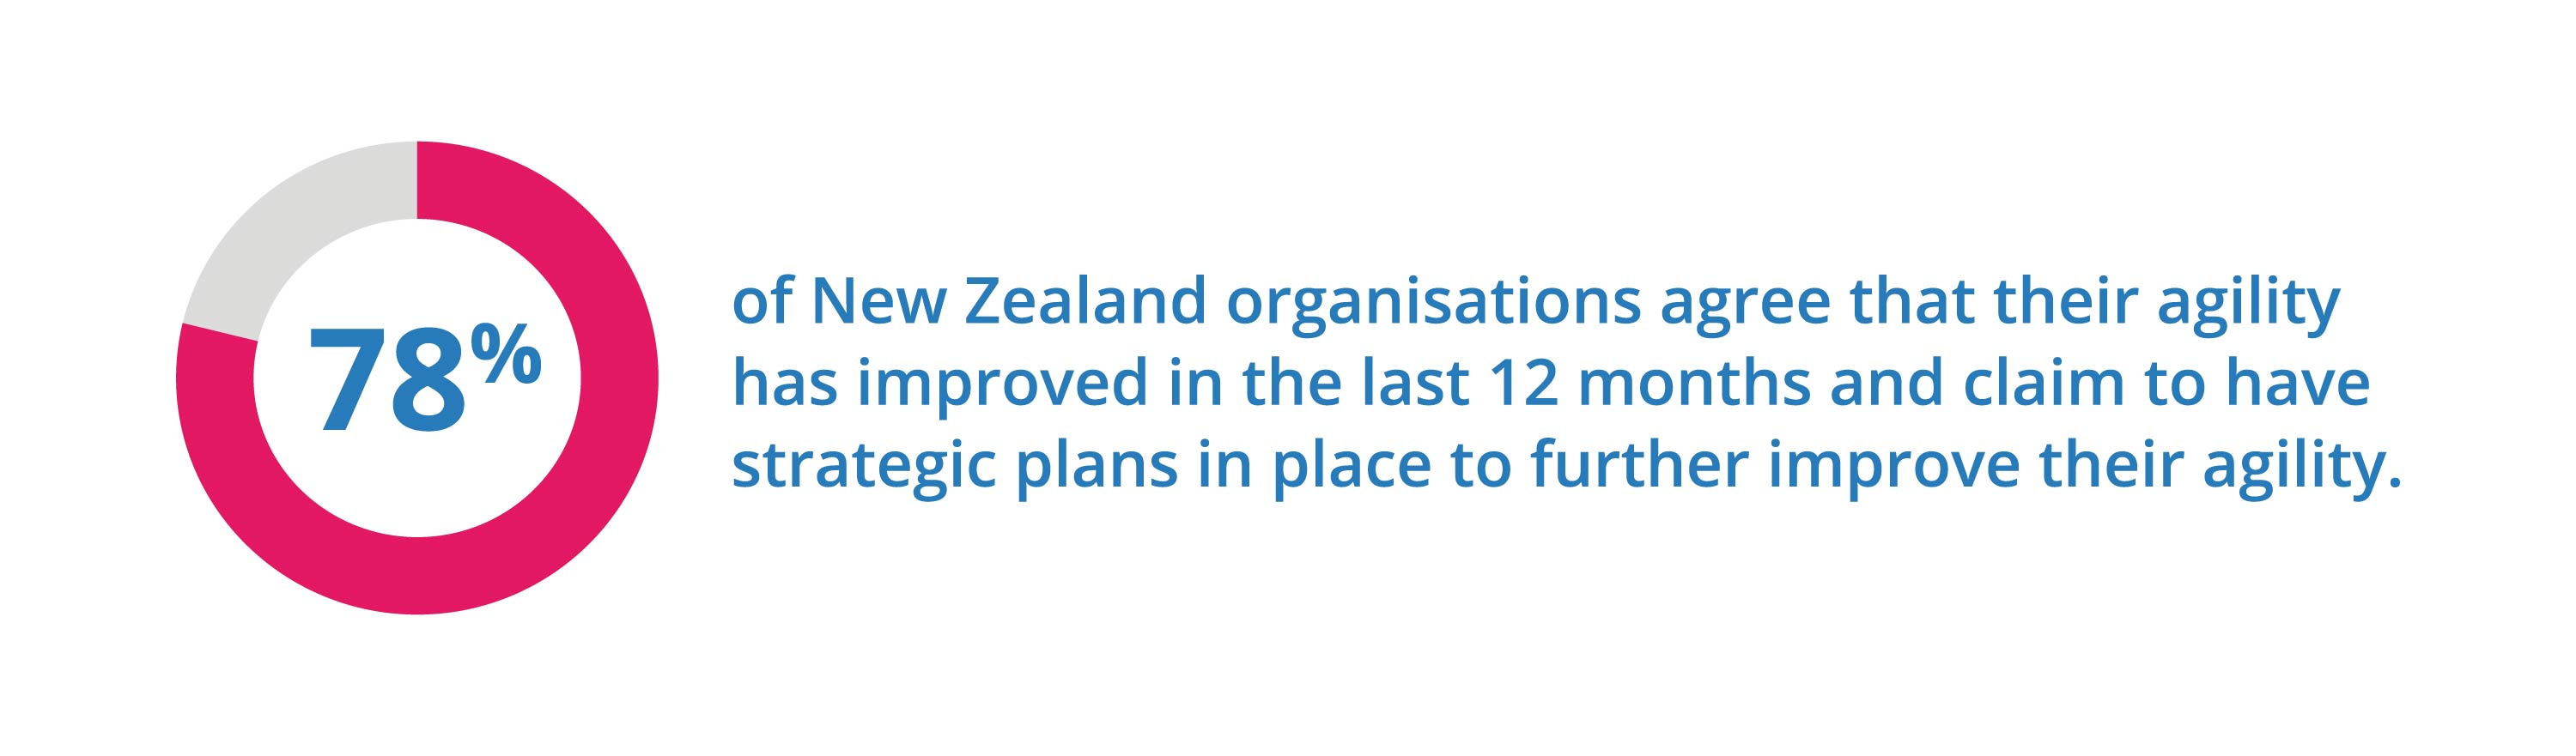 78% of NZ organisations agree that their agility has improved in the last 12 months and claim to have strategic plans in place to further improve their agility.